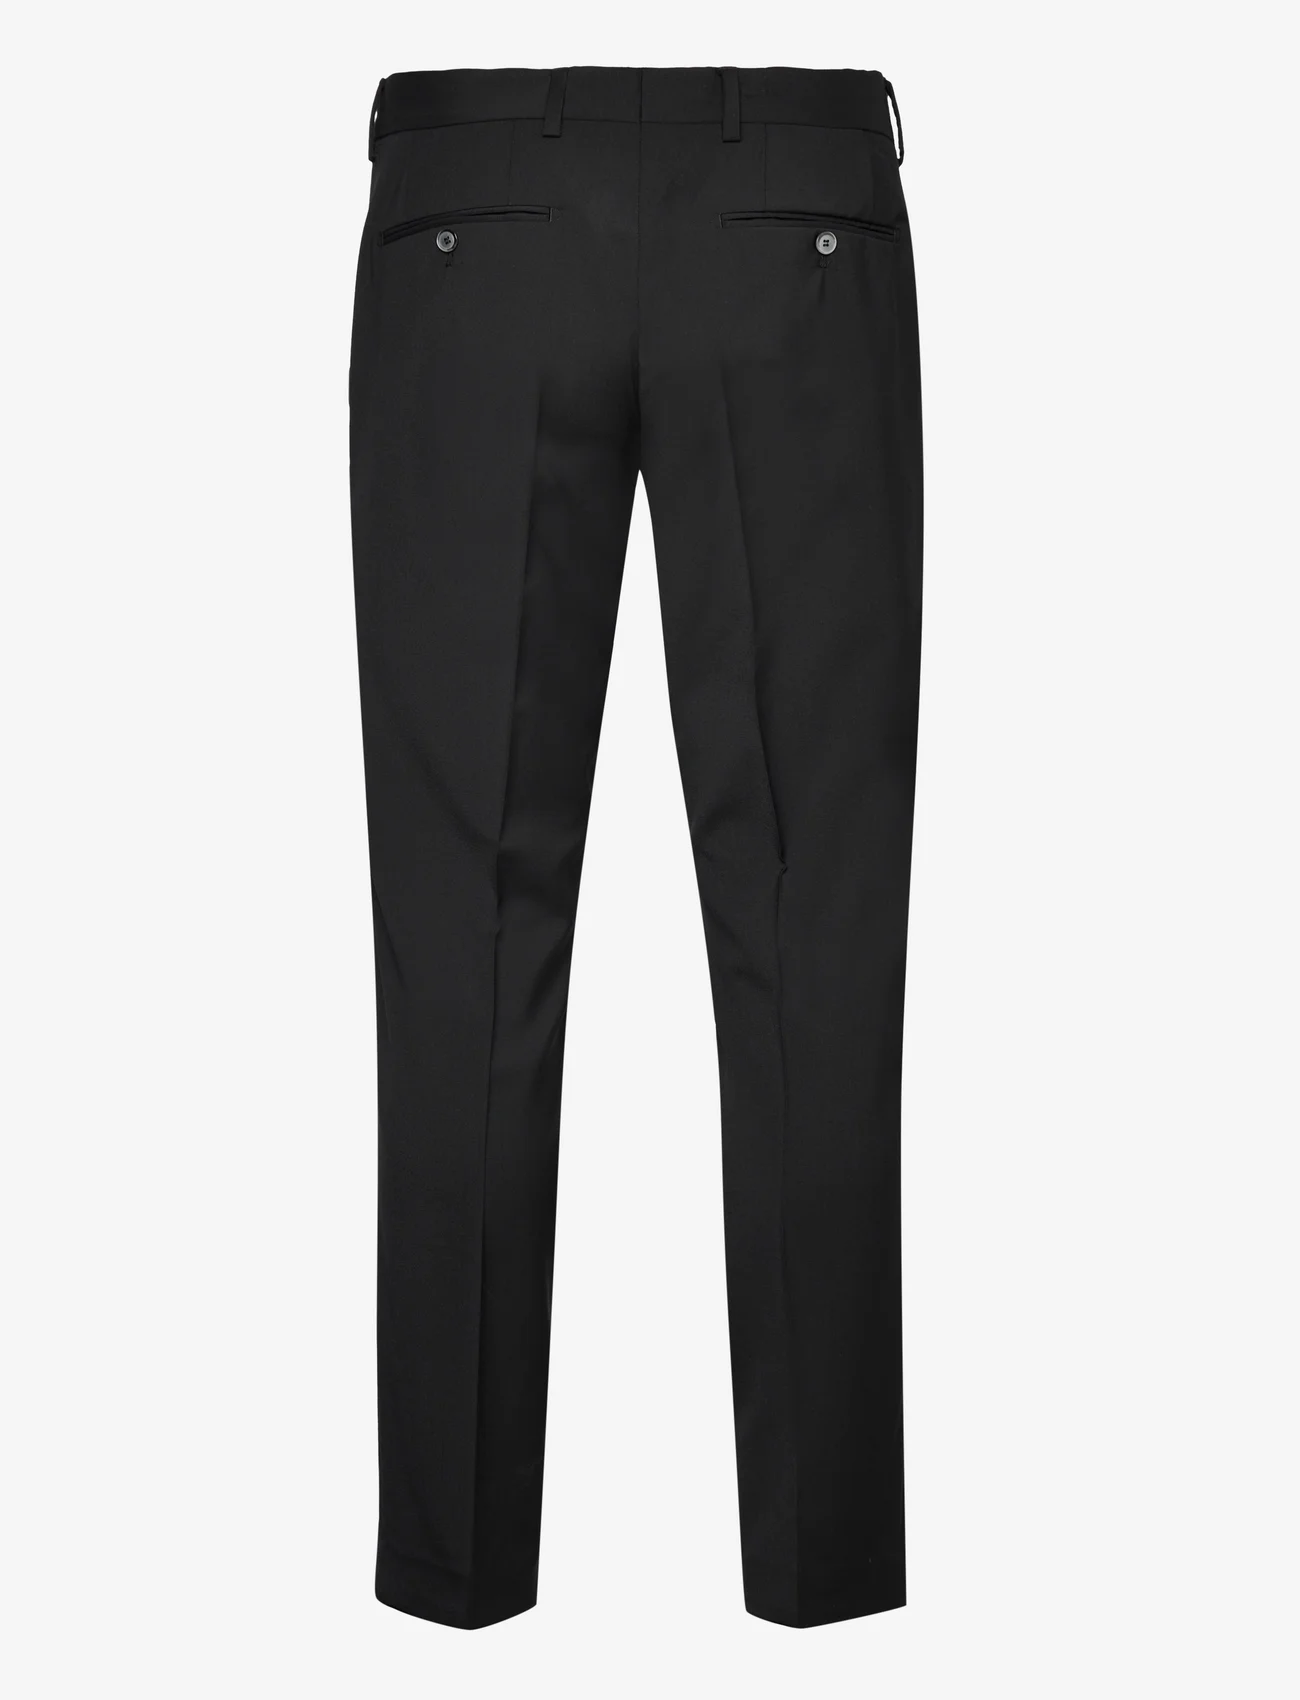 SIR of Sweden - Sven Trousers - nordic style - black - 1